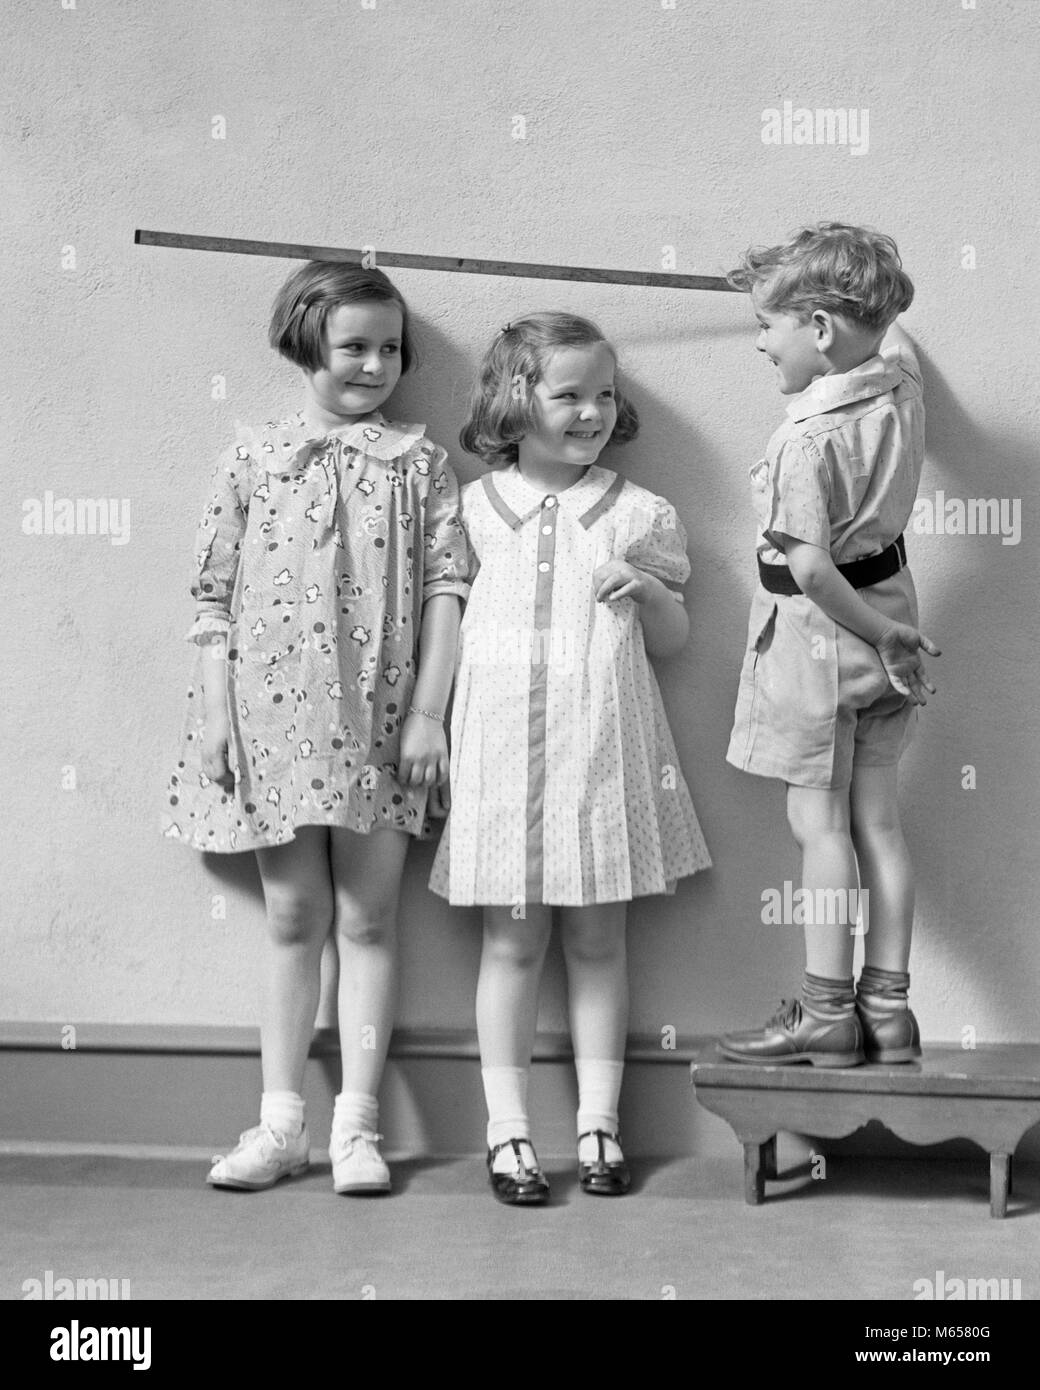 1930s BOY STANDING ON A STOOL MEASURING THE HEIGHT OF TWO GIRLS WITH YARD STICK - j2244 HAR001 HARS PLEASED JOY LIFESTYLE CELEBRATION FEMALES BROTHERS STOOL HEALTHINESS HOME LIFE COPY SPACE FRIENDSHIP FULL-LENGTH PHYSICAL FITNESS CARING INDOORS SIBLINGS SISTERS NOSTALGIA TOGETHERNESS 3-4 YEARS DRESSES GOALS SUCCESS 5-6 YEARS HAPPINESS CHEERFUL DISCOVERY STRATEGY EXCITEMENT PRIDE AUTHORITY GROWTH SIBLING SMILES CONNECTION JOYFUL COOPERATION SHORT PANTS SMALL GROUP OF PEOPLE SOLUTIONS CHILDHOOD JUVENILES MALES MARY JANE SHOES PRECISION YARD STICK B&W BLACK AND WHITE CAUCASIAN ETHNICITY COMPARING Stock Photo